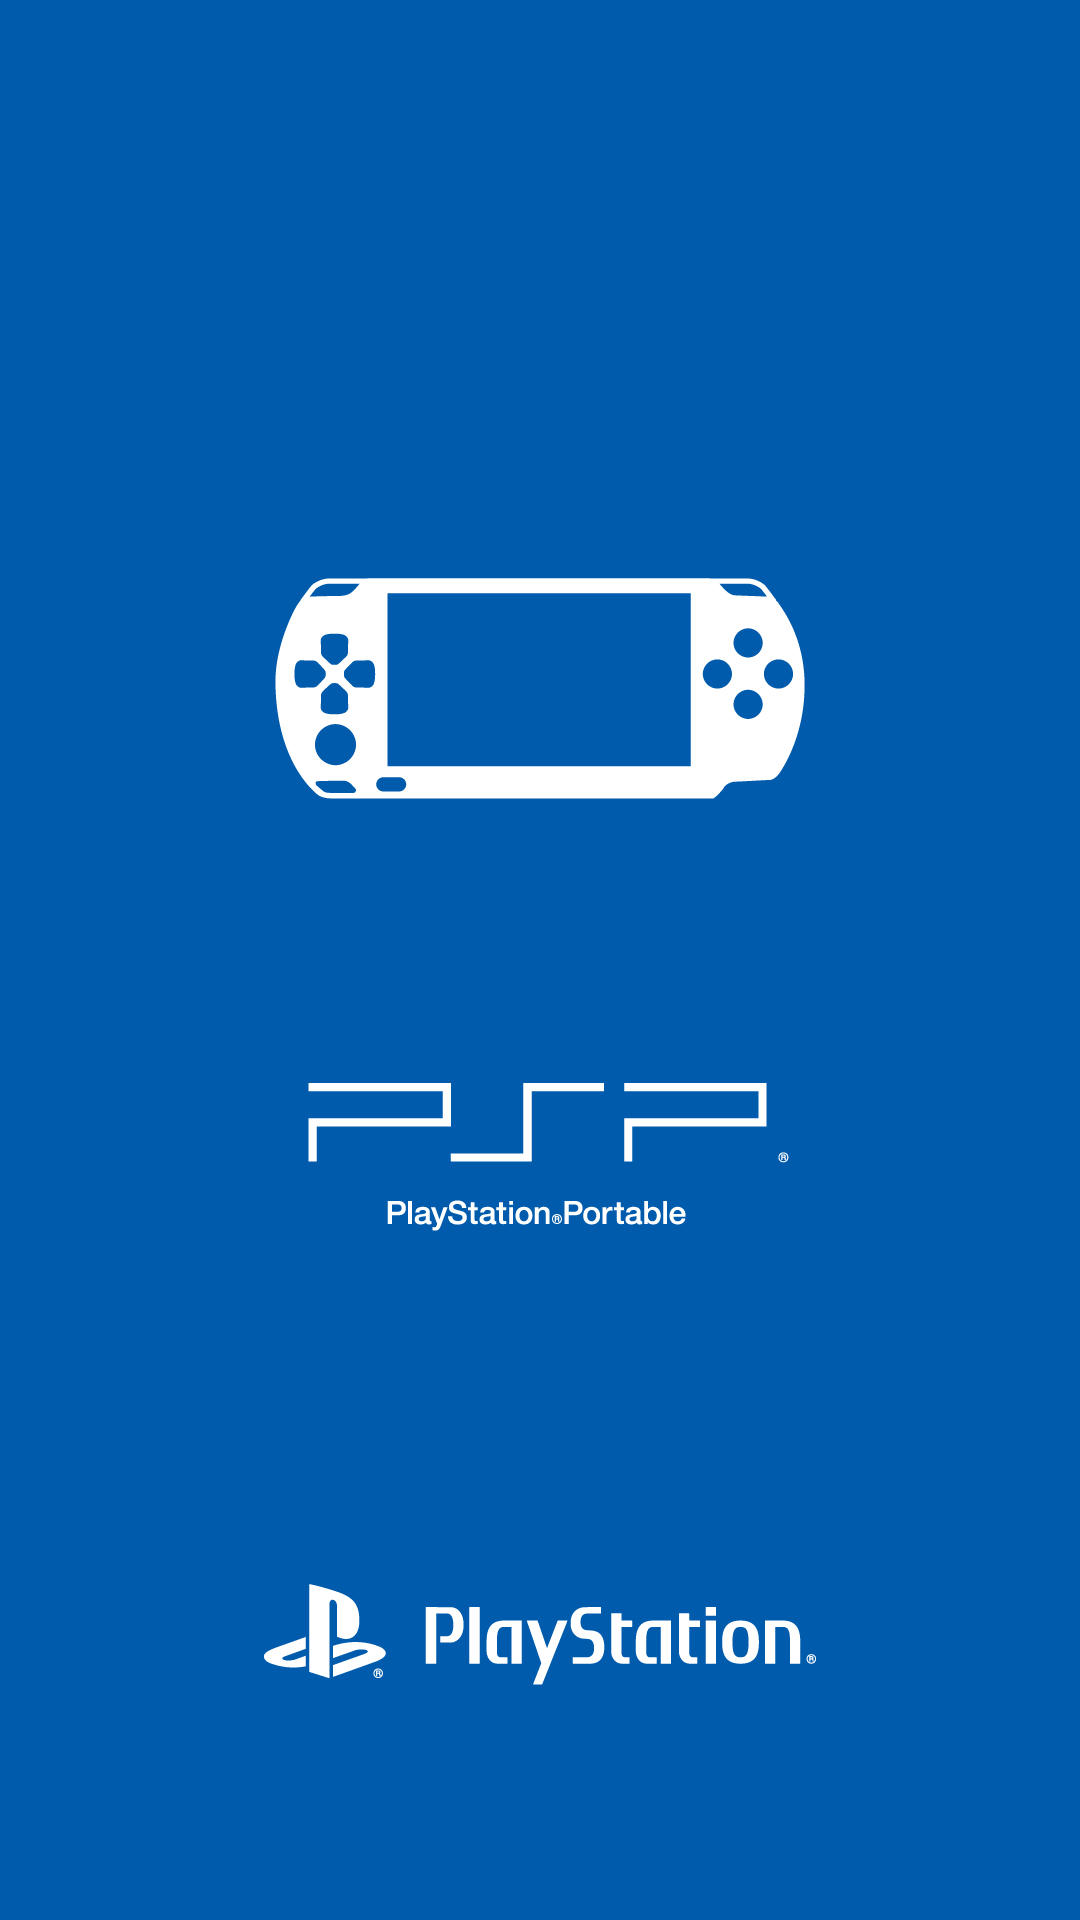 psp wallpaper, blue, text, gadget, technology, font, video game accessory, electronic device, electric blue, home game console accessory, wii accessory